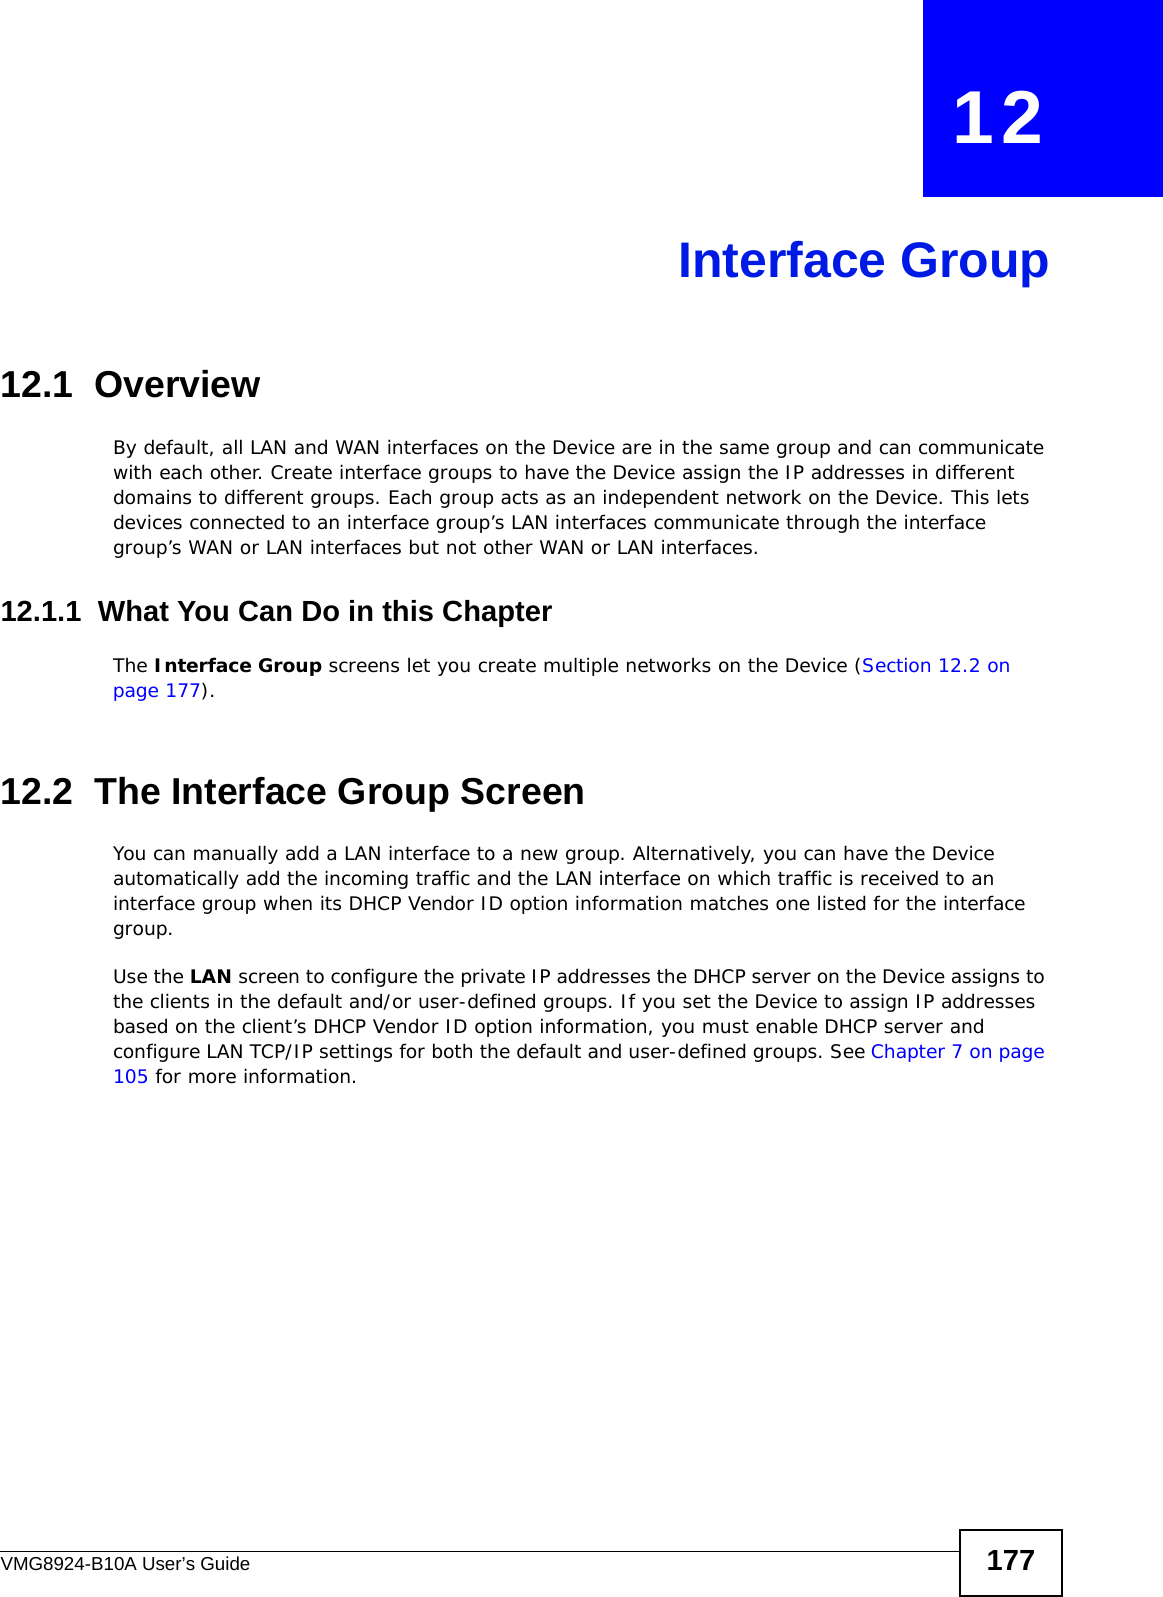 VMG8924-B10A User’s Guide 177CHAPTER   12Interface Group12.1  OverviewBy default, all LAN and WAN interfaces on the Device are in the same group and can communicate with each other. Create interface groups to have the Device assign the IP addresses in different domains to different groups. Each group acts as an independent network on the Device. This lets devices connected to an interface group’s LAN interfaces communicate through the interface group’s WAN or LAN interfaces but not other WAN or LAN interfaces.12.1.1  What You Can Do in this ChapterThe Interface Group screens let you create multiple networks on the Device (Section 12.2 on page 177).12.2  The Interface Group ScreenYou can manually add a LAN interface to a new group. Alternatively, you can have the Device automatically add the incoming traffic and the LAN interface on which traffic is received to an interface group when its DHCP Vendor ID option information matches one listed for the interface group. Use the LAN screen to configure the private IP addresses the DHCP server on the Device assigns to the clients in the default and/or user-defined groups. If you set the Device to assign IP addresses based on the client’s DHCP Vendor ID option information, you must enable DHCP server and configure LAN TCP/IP settings for both the default and user-defined groups. See Chapter 7 on page 105 for more information.